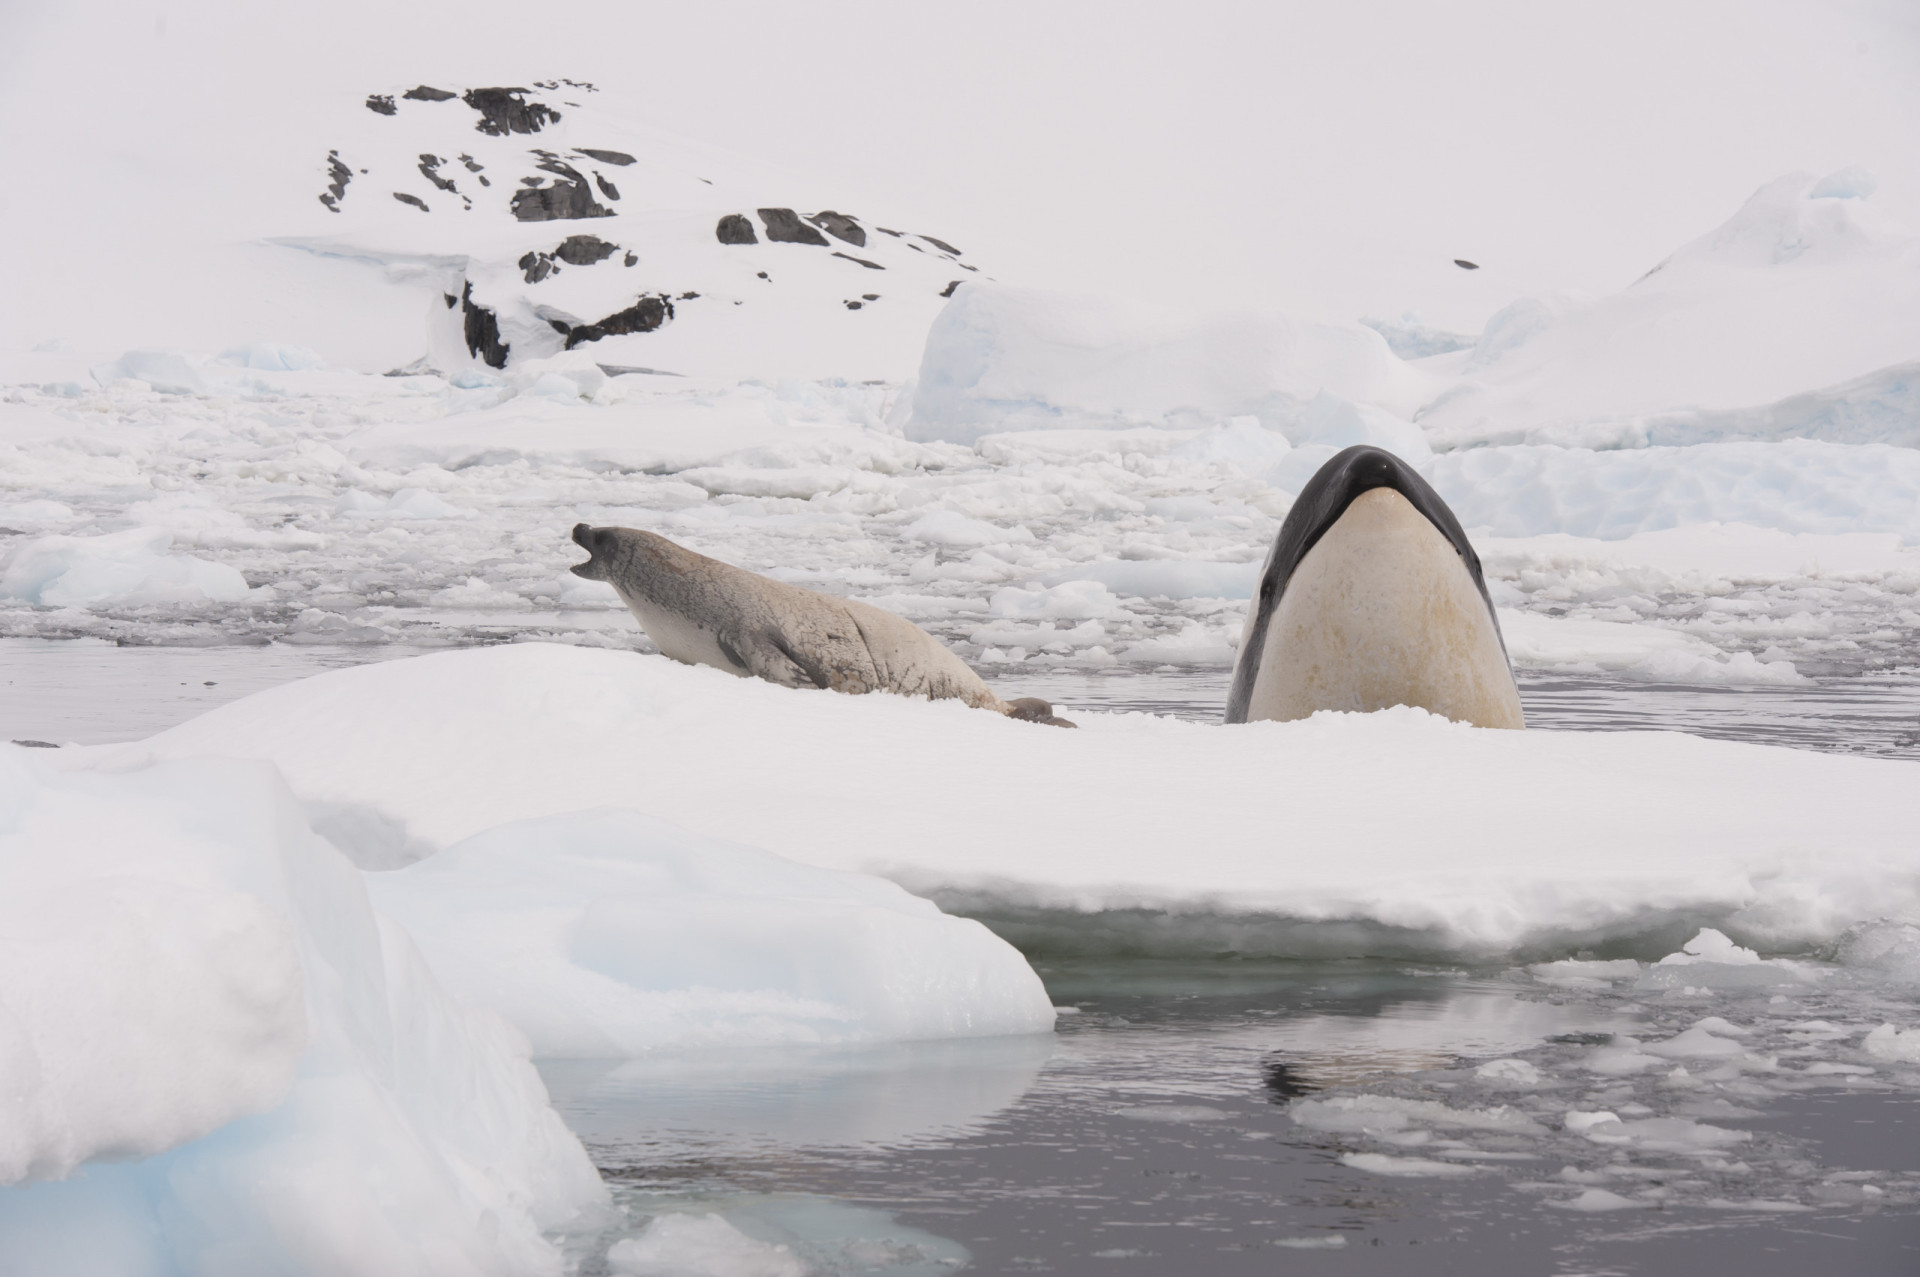 <p>Orcas are reportedly known to work together in coordinated attacks to create even bigger waves that can knock prey off from their safe perches on floating ice and into the water.</p><p>You may also like:<a href="https://www.starsinsider.com/n/337249?utm_source=msn.com&utm_medium=display&utm_campaign=referral_description&utm_content=551403en-en_selected"> The most explosive celebrity interviews of all time</a></p>